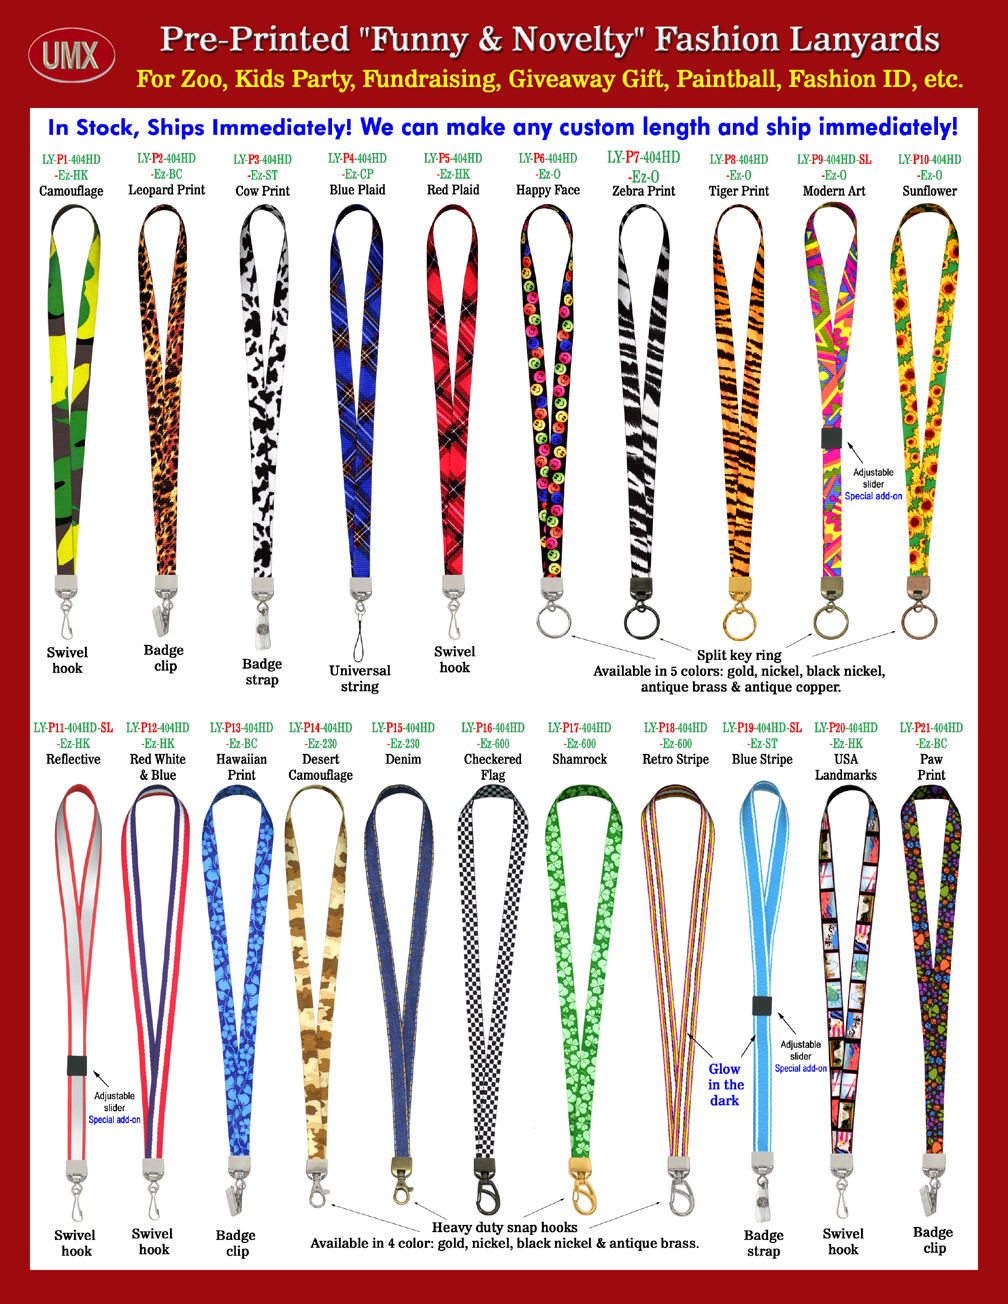 Funny lanyards and novelty lanyards are always a good alternatives to wear for fun.